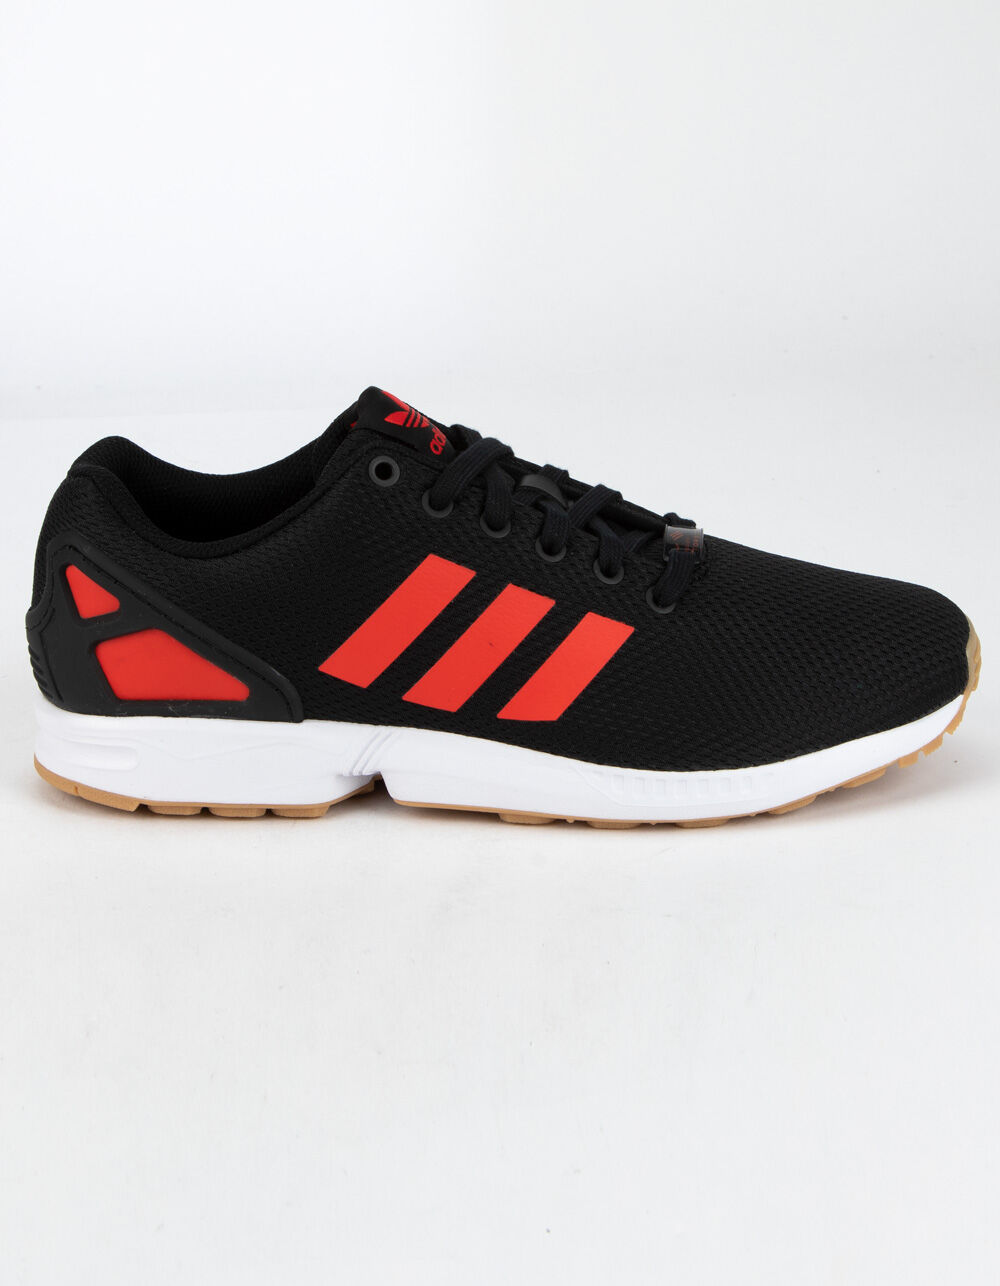 ADIDAS ZX Flux Black & Red Shoes image number 0